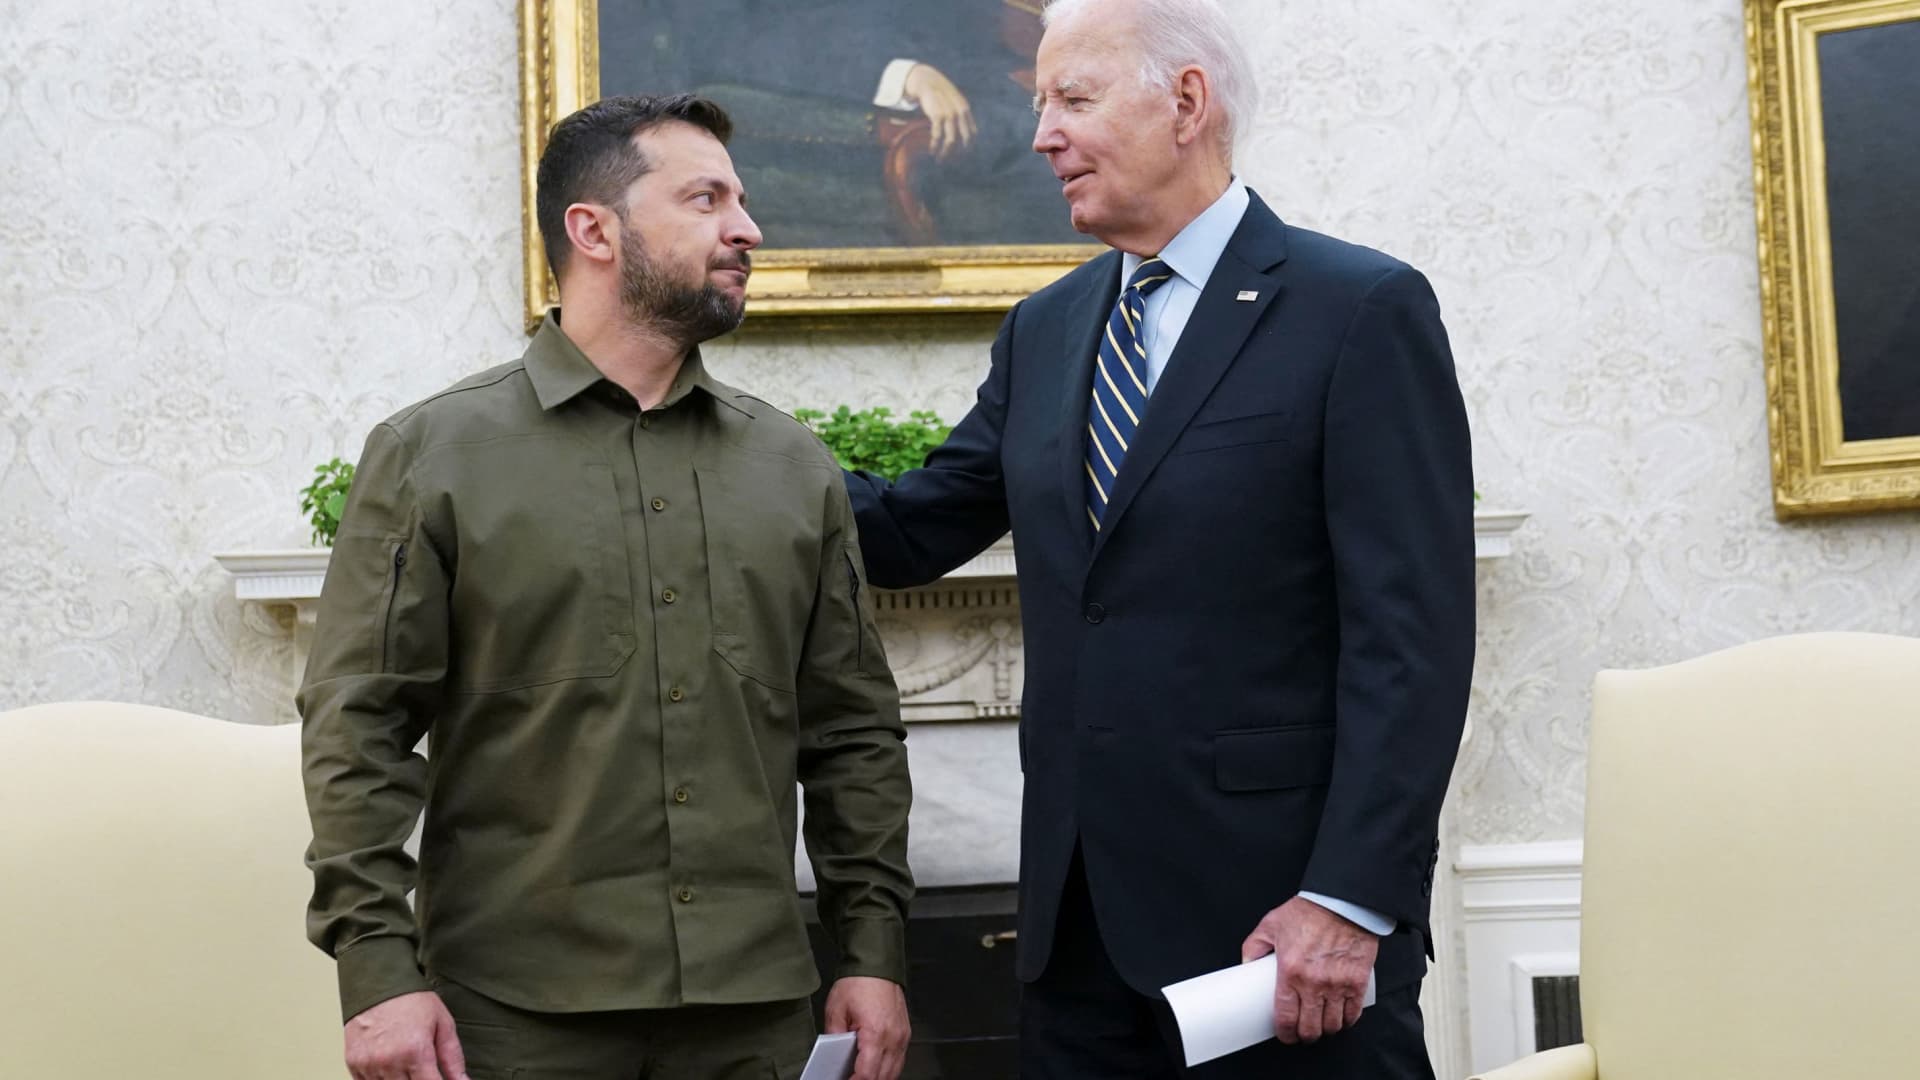 Ukraine leader Zelenskyy meets with Biden, Congress as some Republicans sour on support